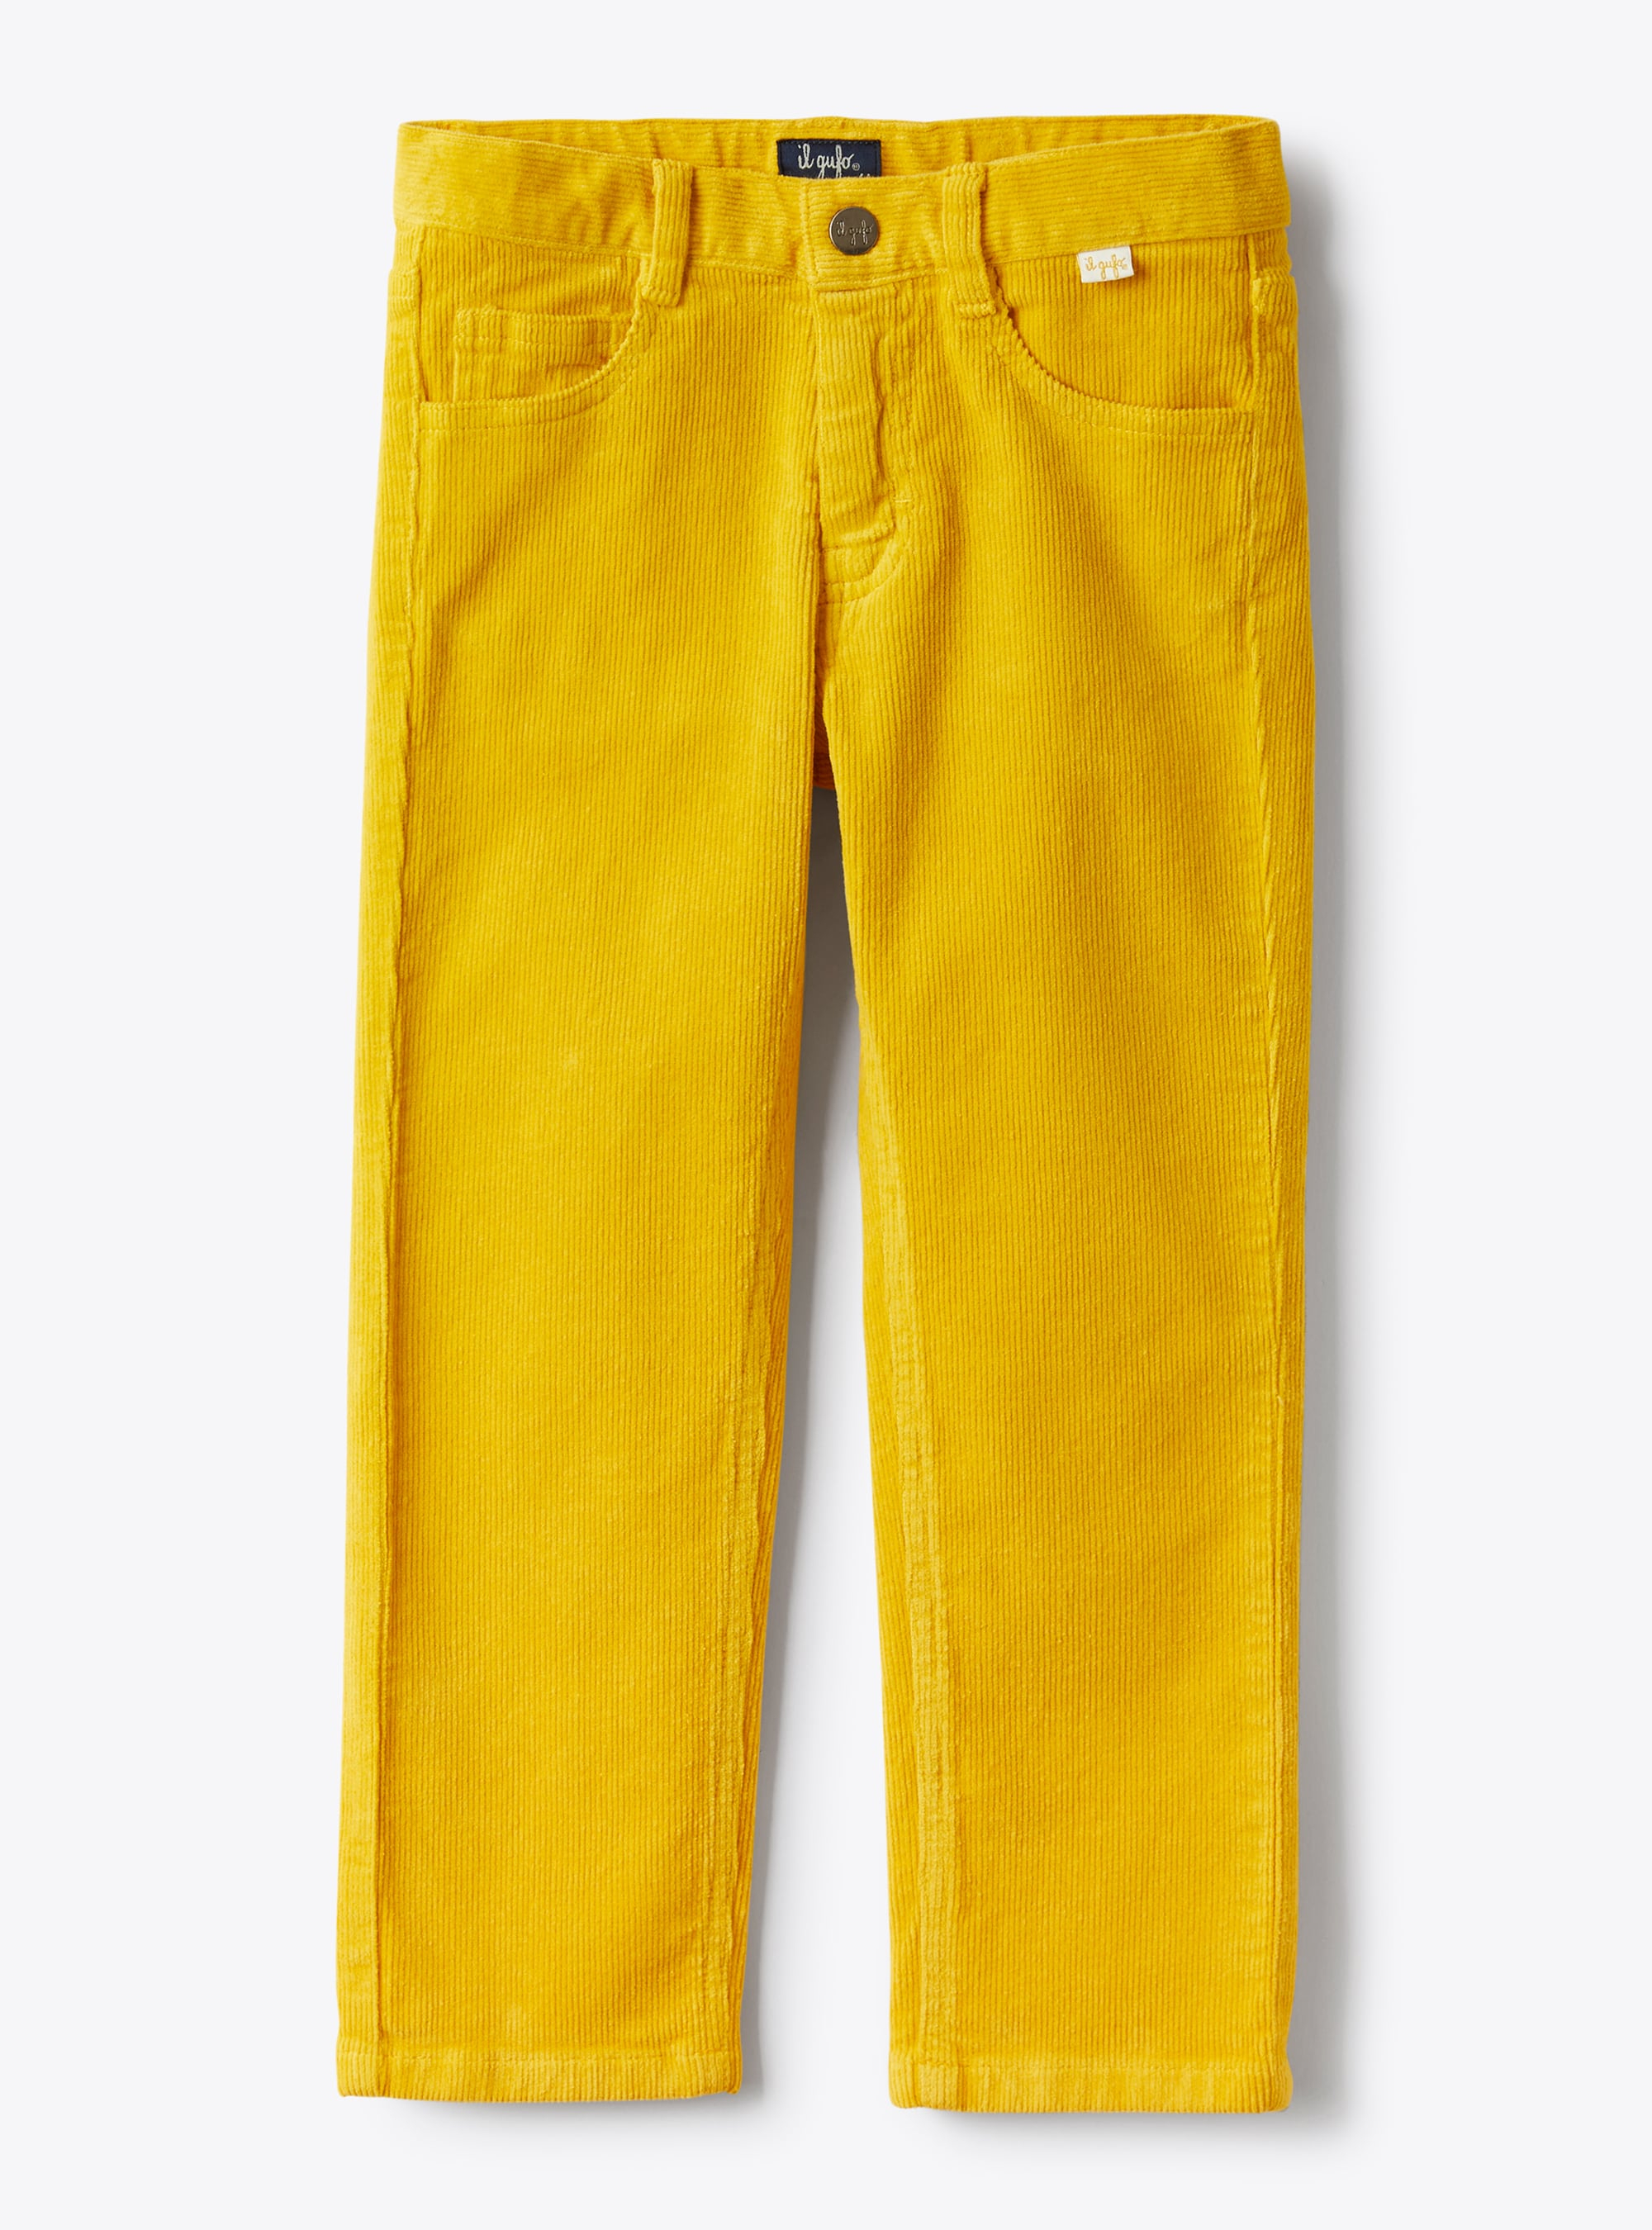 Trousers in yellow corduroy - Trousers - Il Gufo